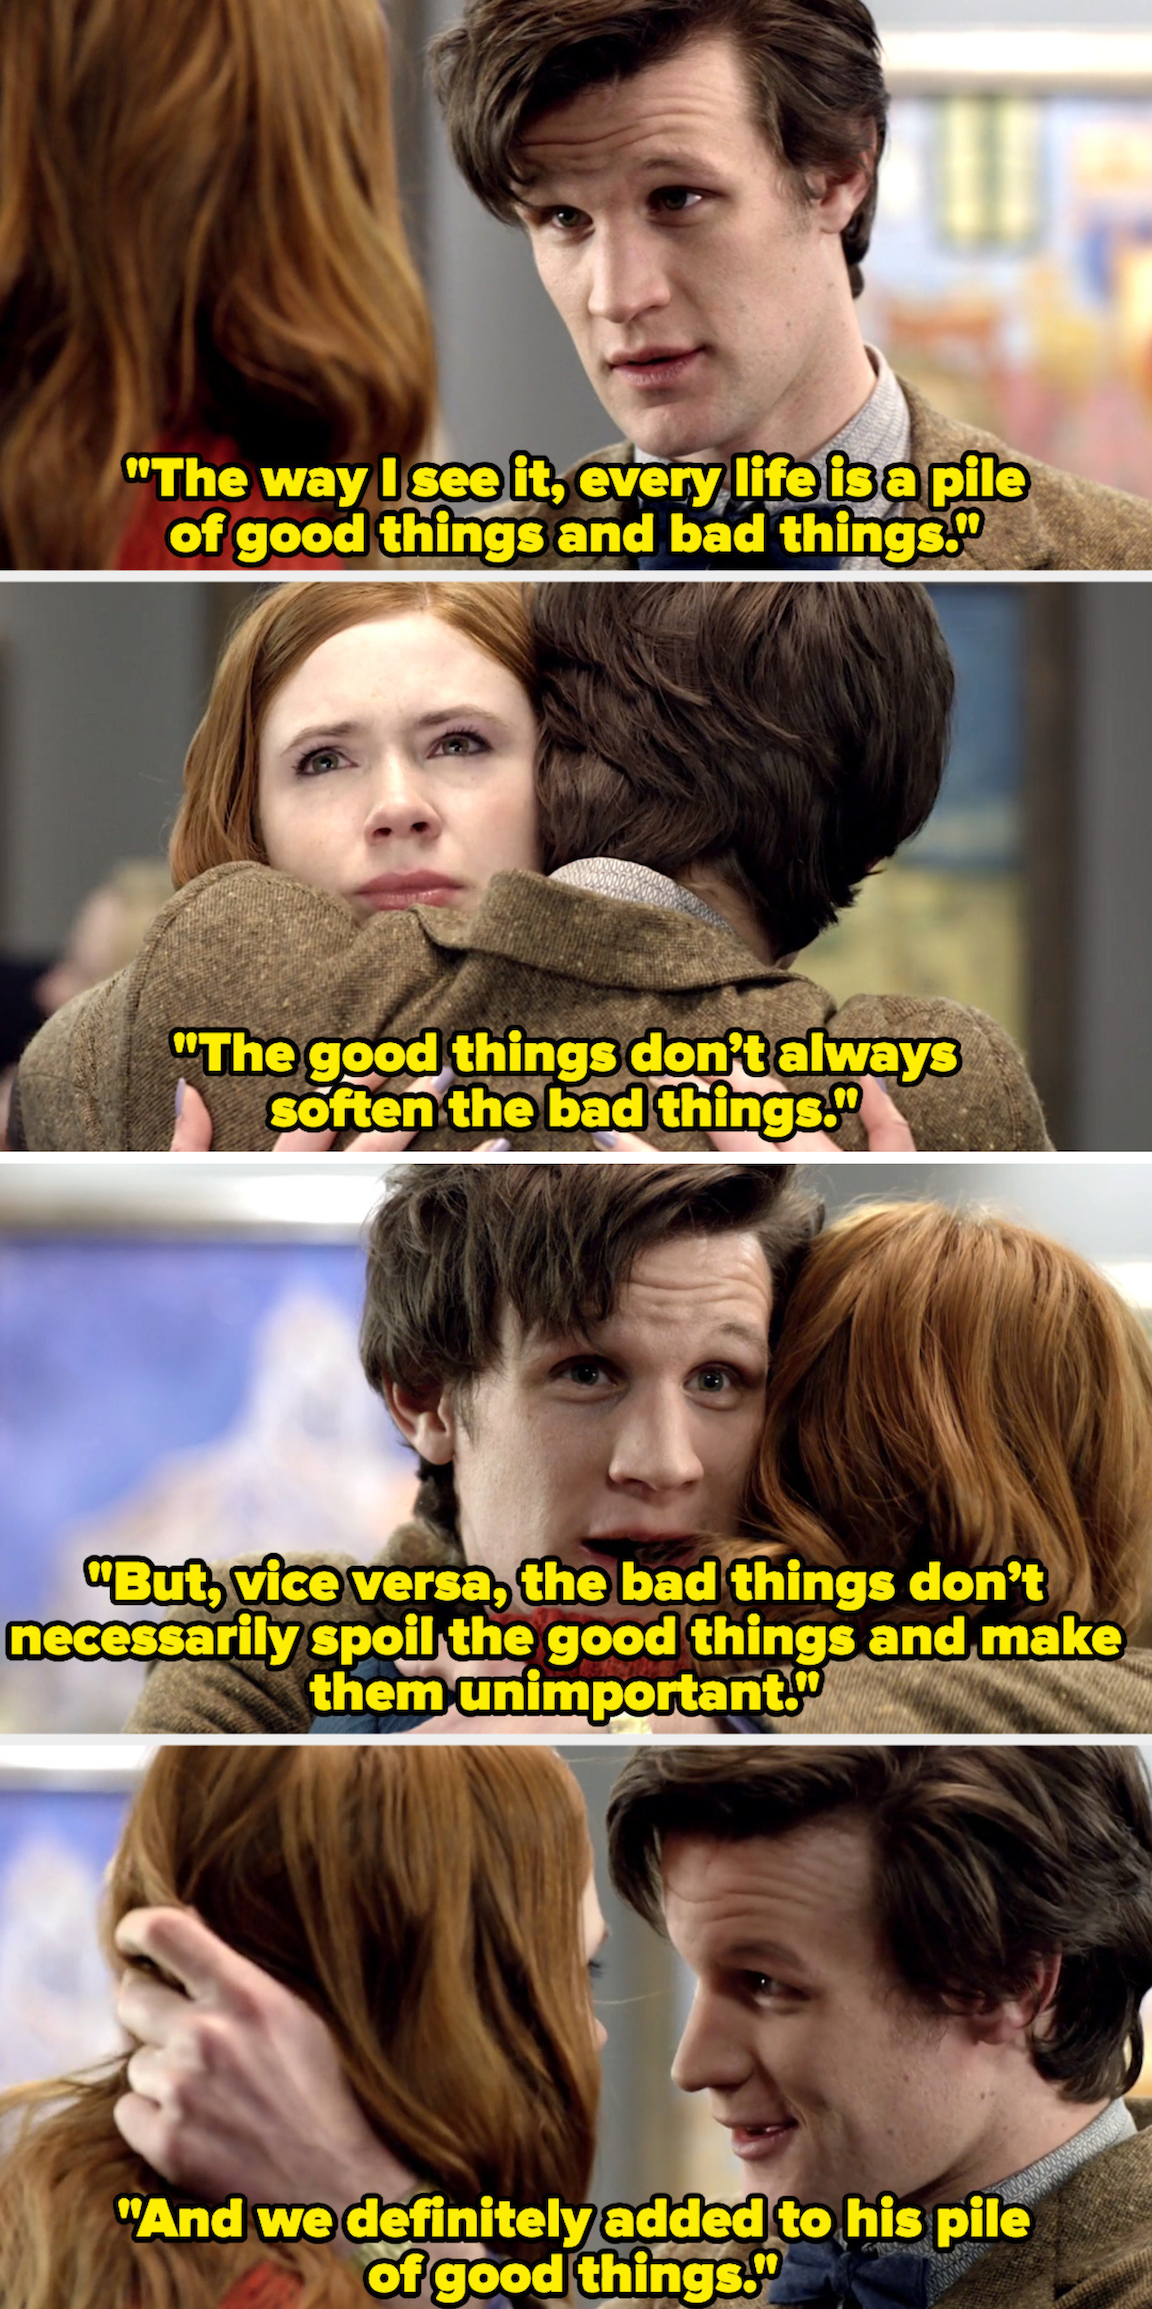 &quot;And we definitely added to his pile of good things.&quot;